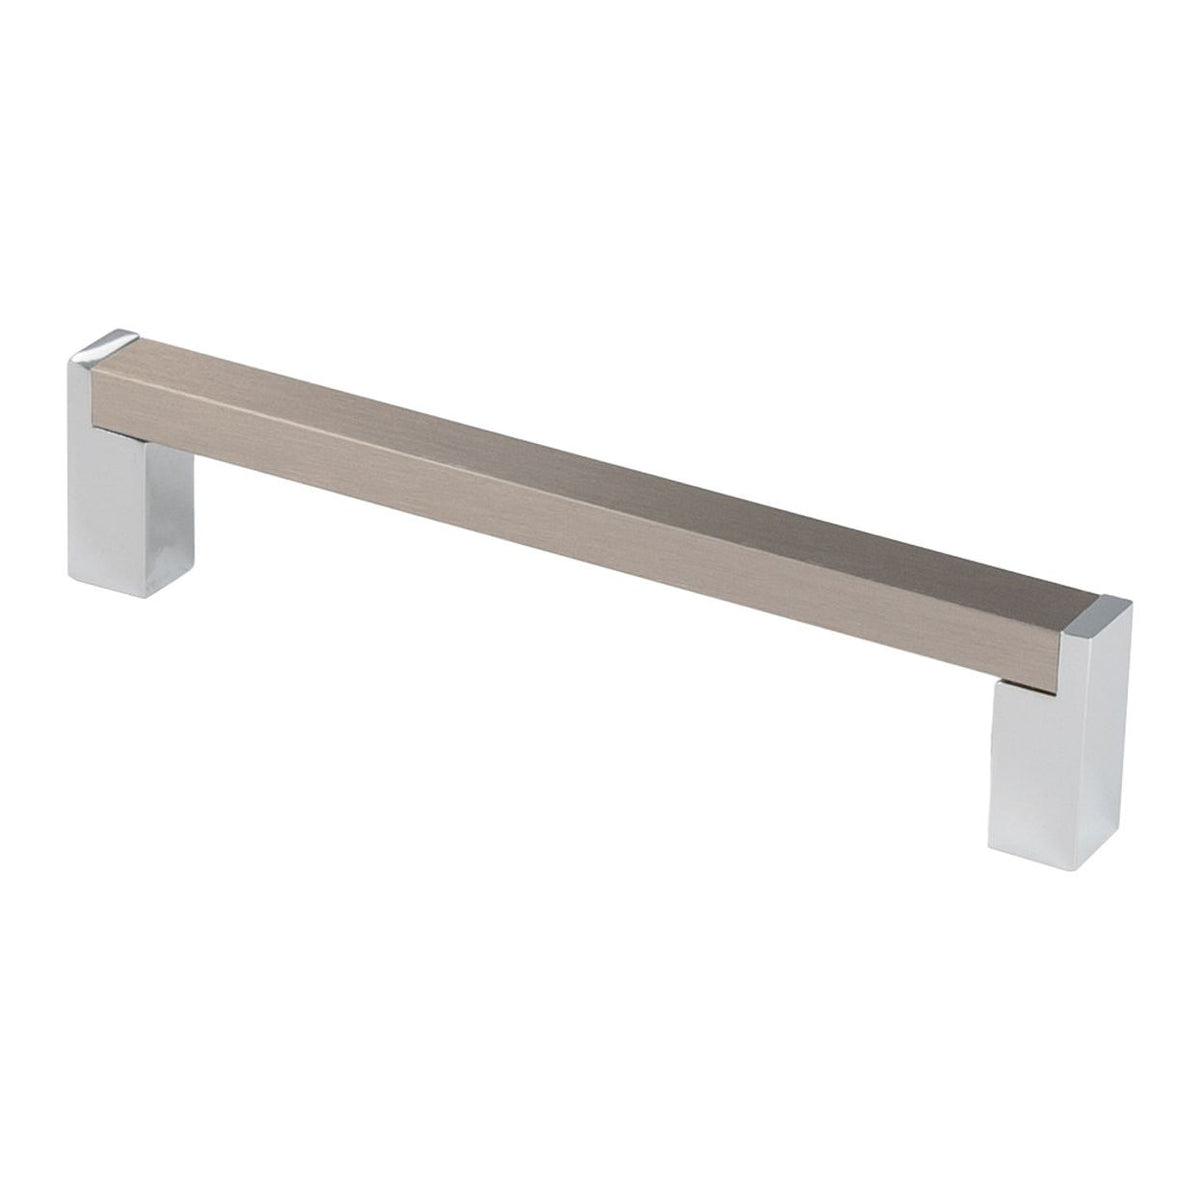 Rocheleau - POI-R2004-128-PC-BSN - Shopify - 2.93 - Chrome and Brushed Nickel